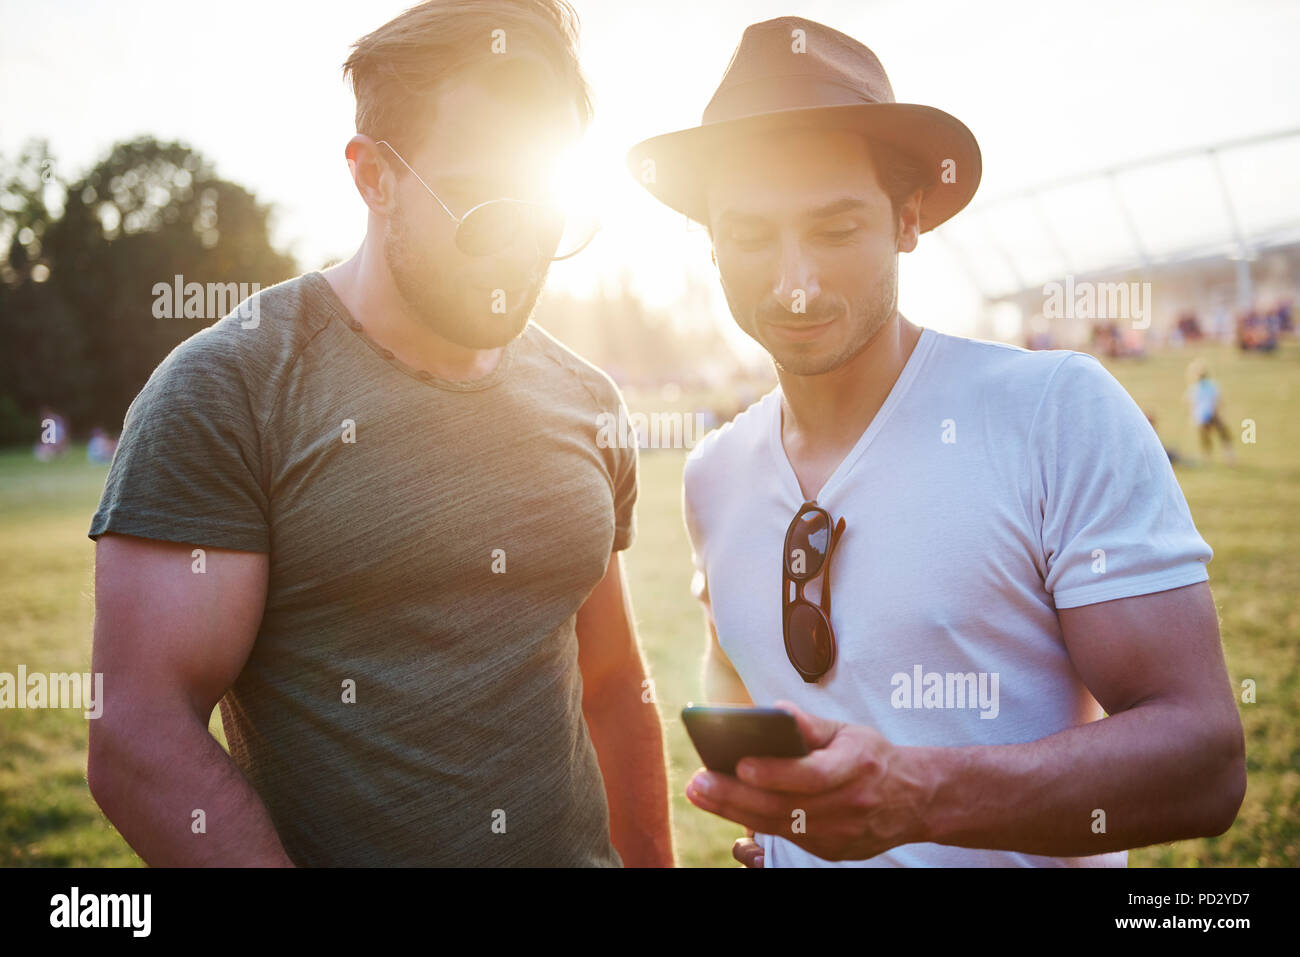 Two young men looking at smartphone at Holi Festival, detail of feet Stock Photo